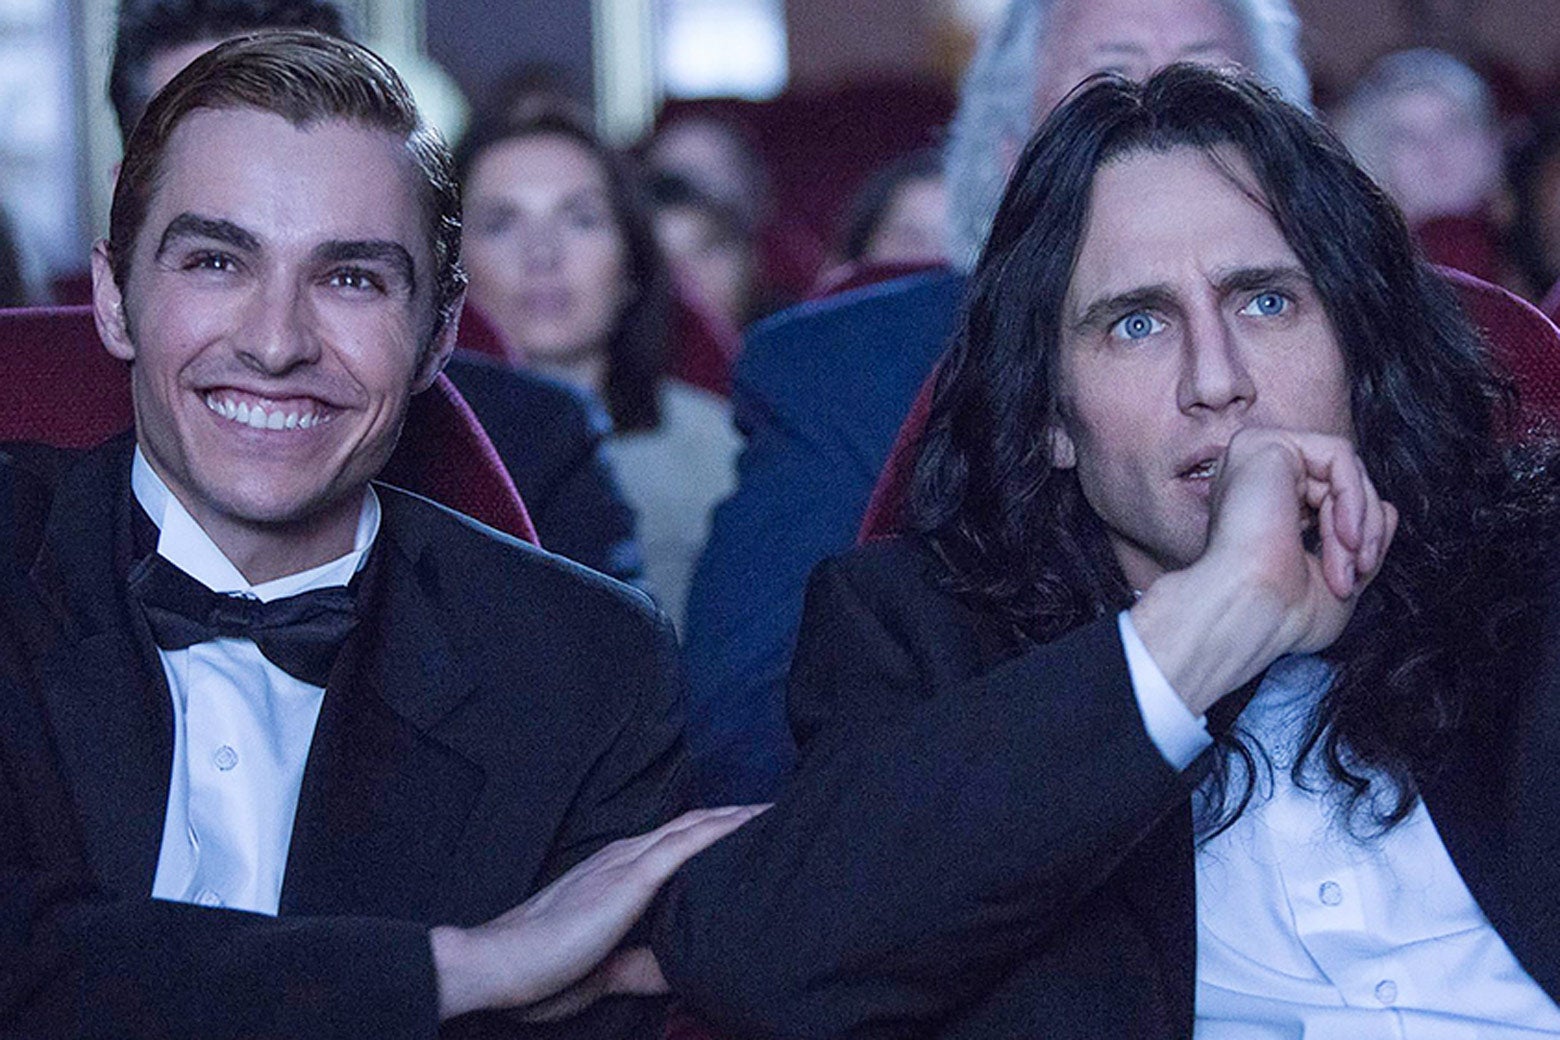 Dave Franco and James Franco in The Disaster Artist.